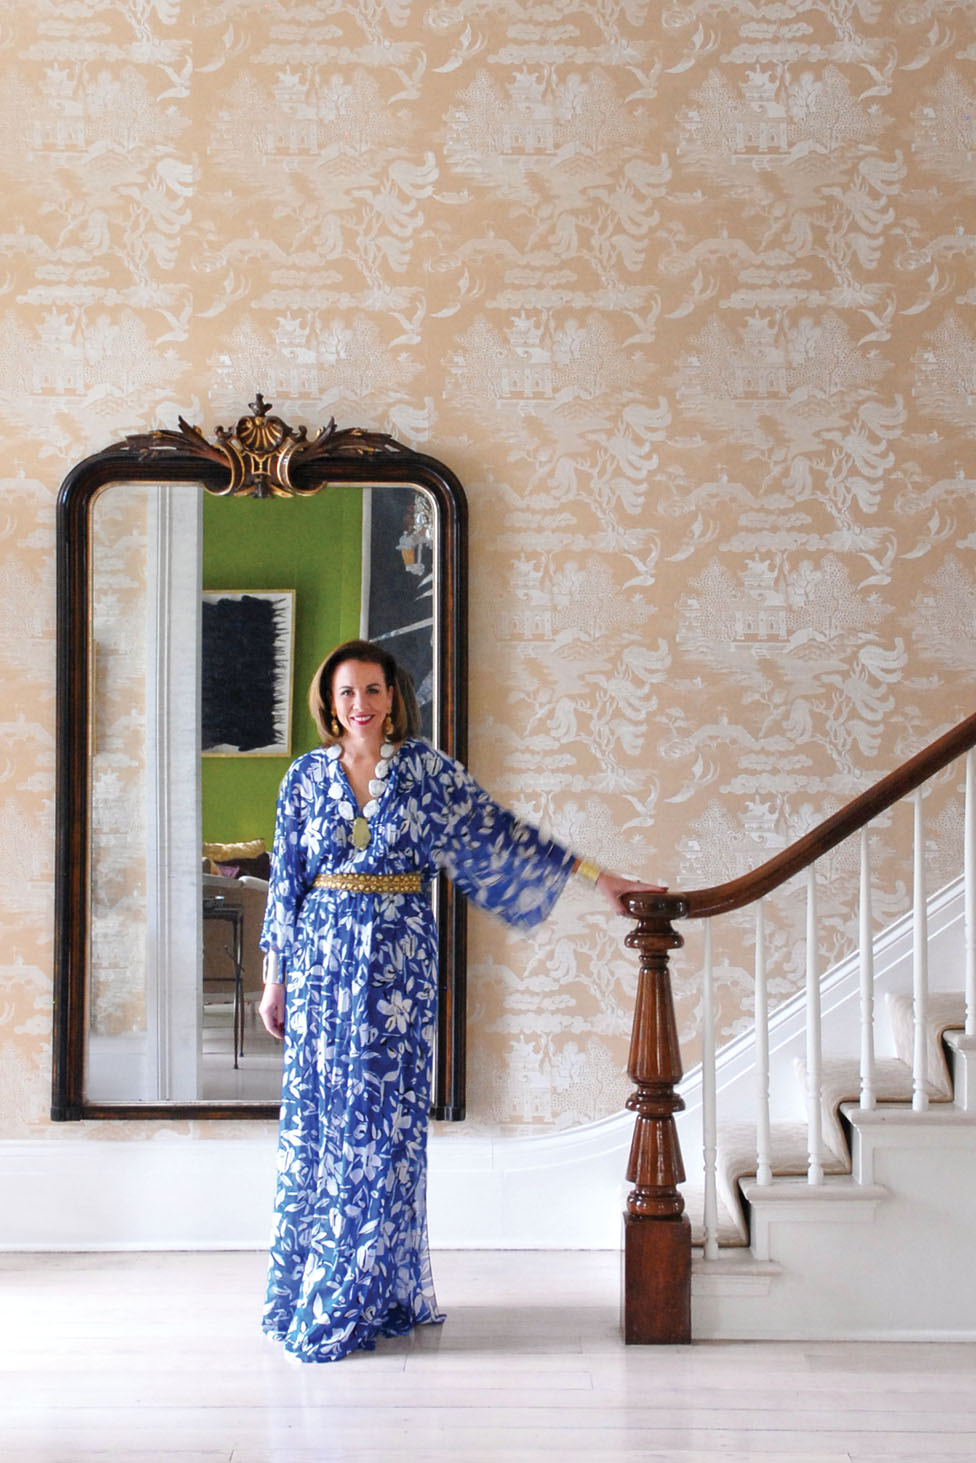 founder of Leontine Linens in a long blue floral print dress stands at the bottom of an elegant staircase